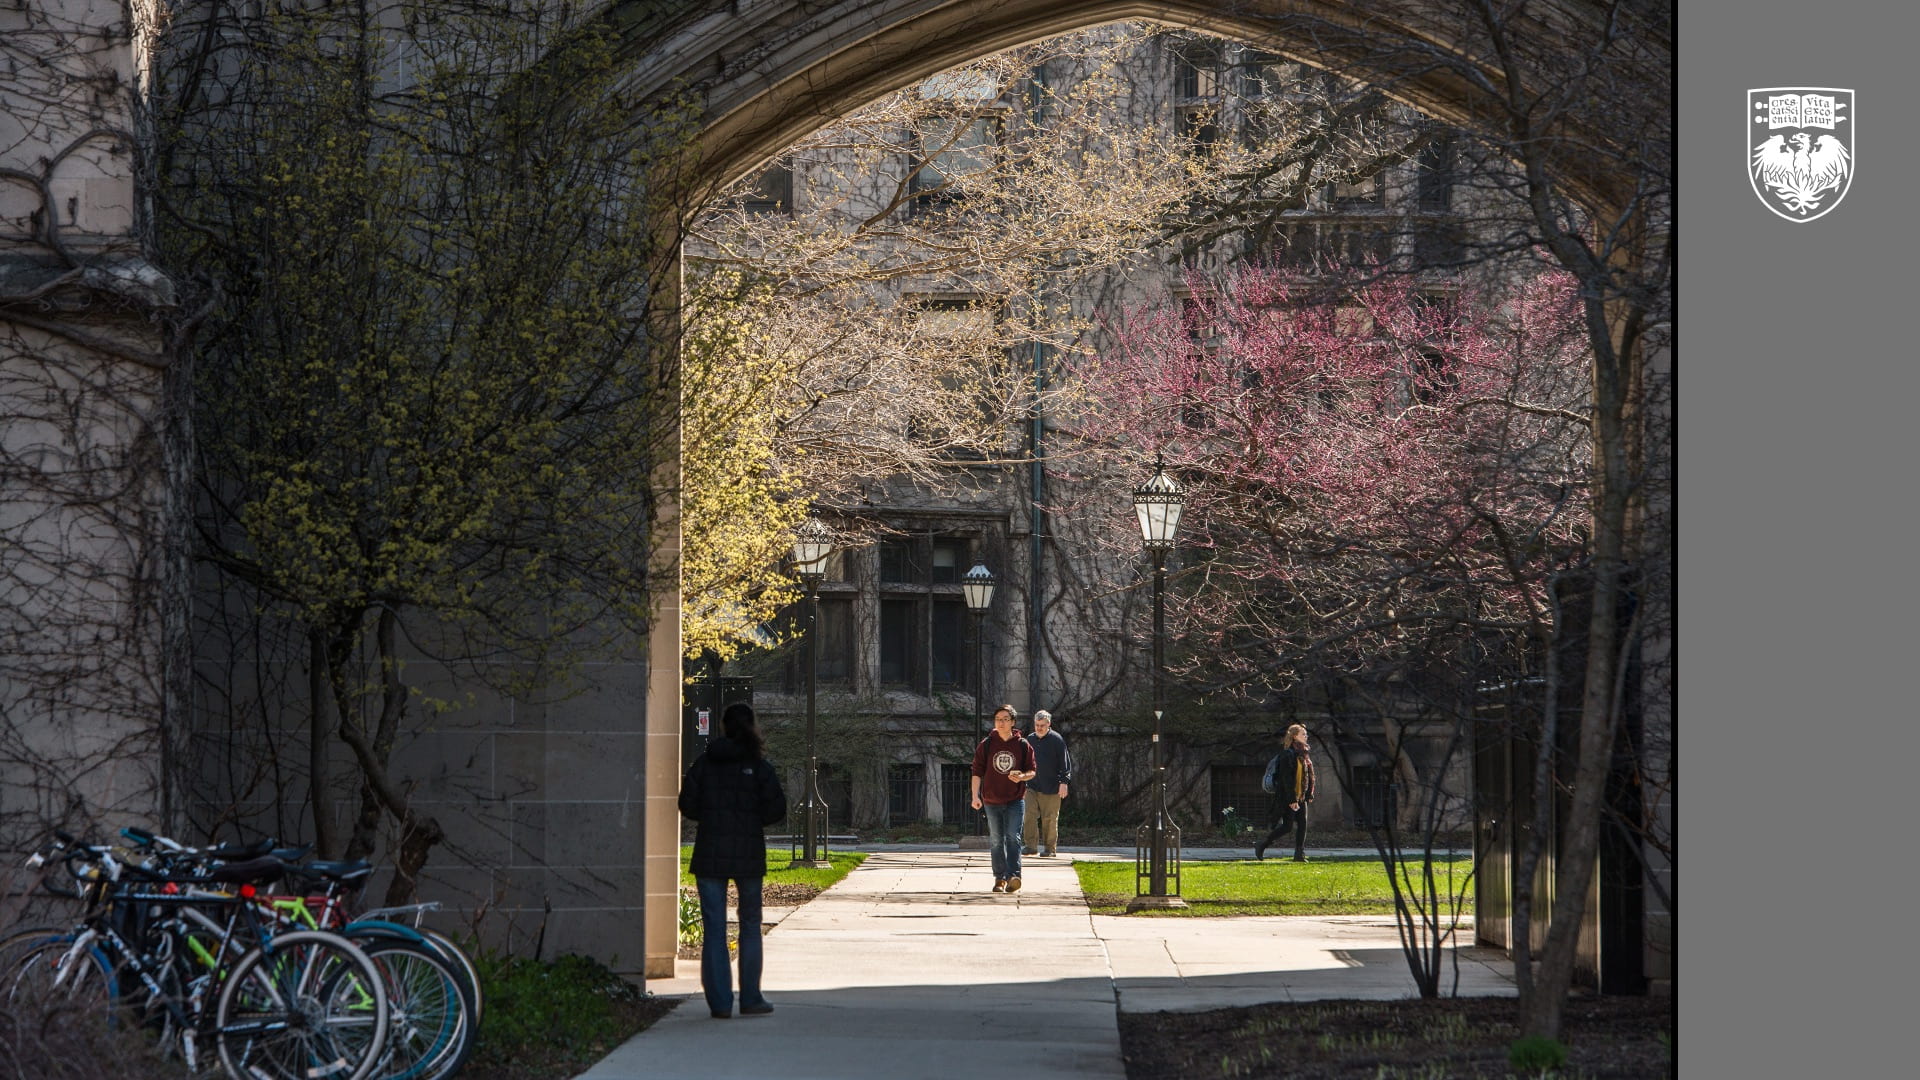 View through an archway of people walking through the quad